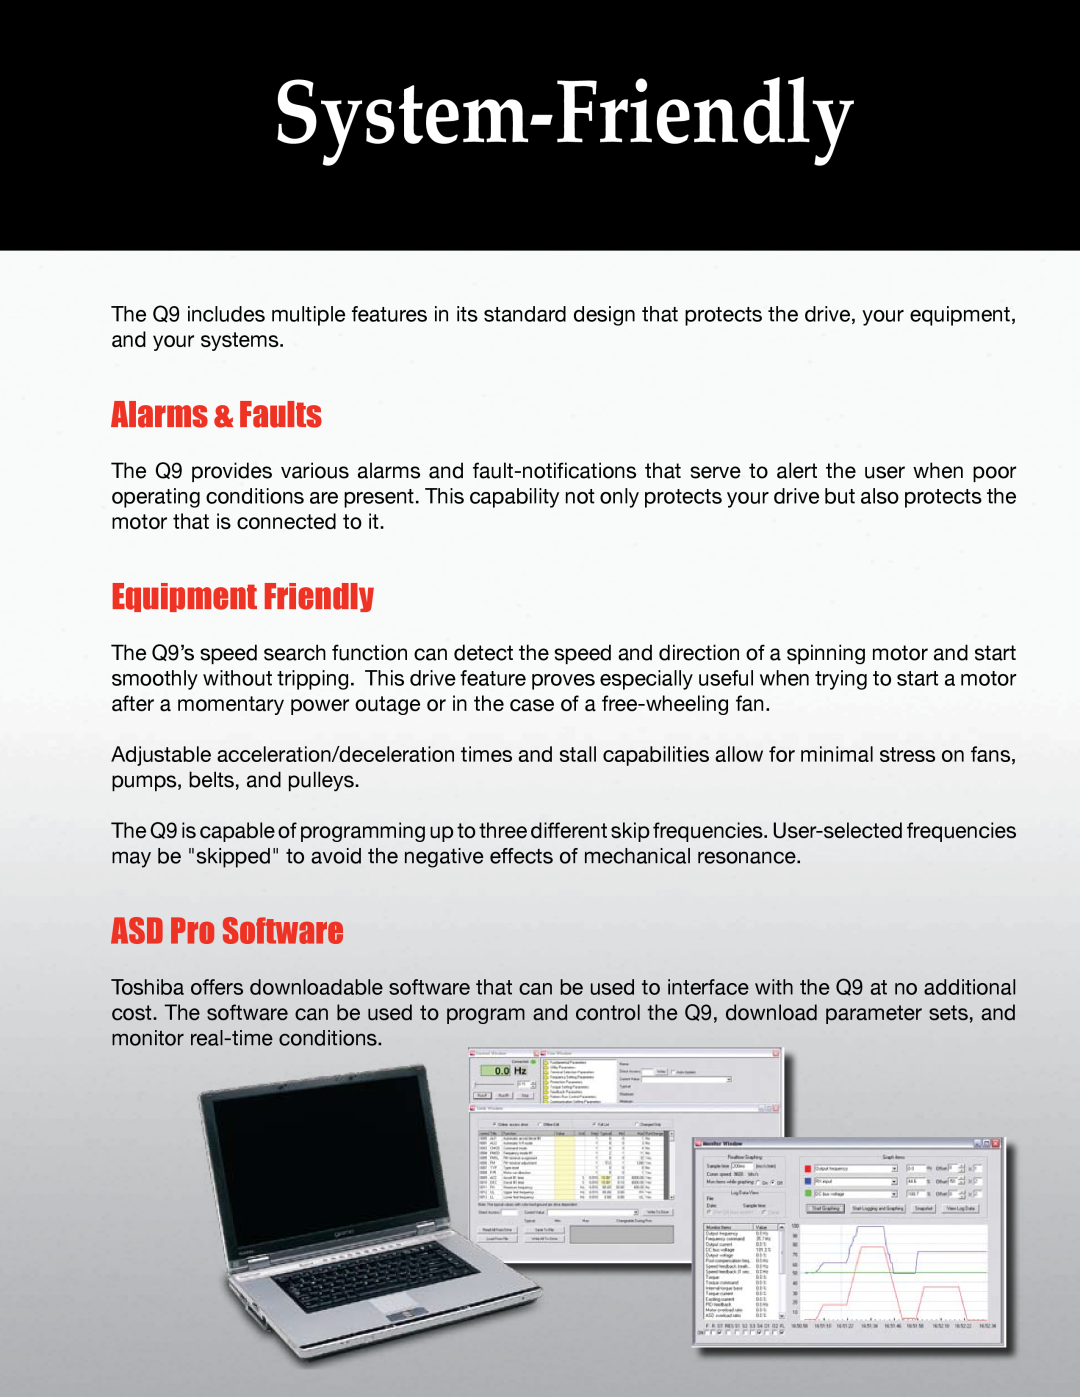 Toshiba Q9 Series manual Alarms & Faults, Equipment Friendly, ASD Pro Software, System-Friendly 